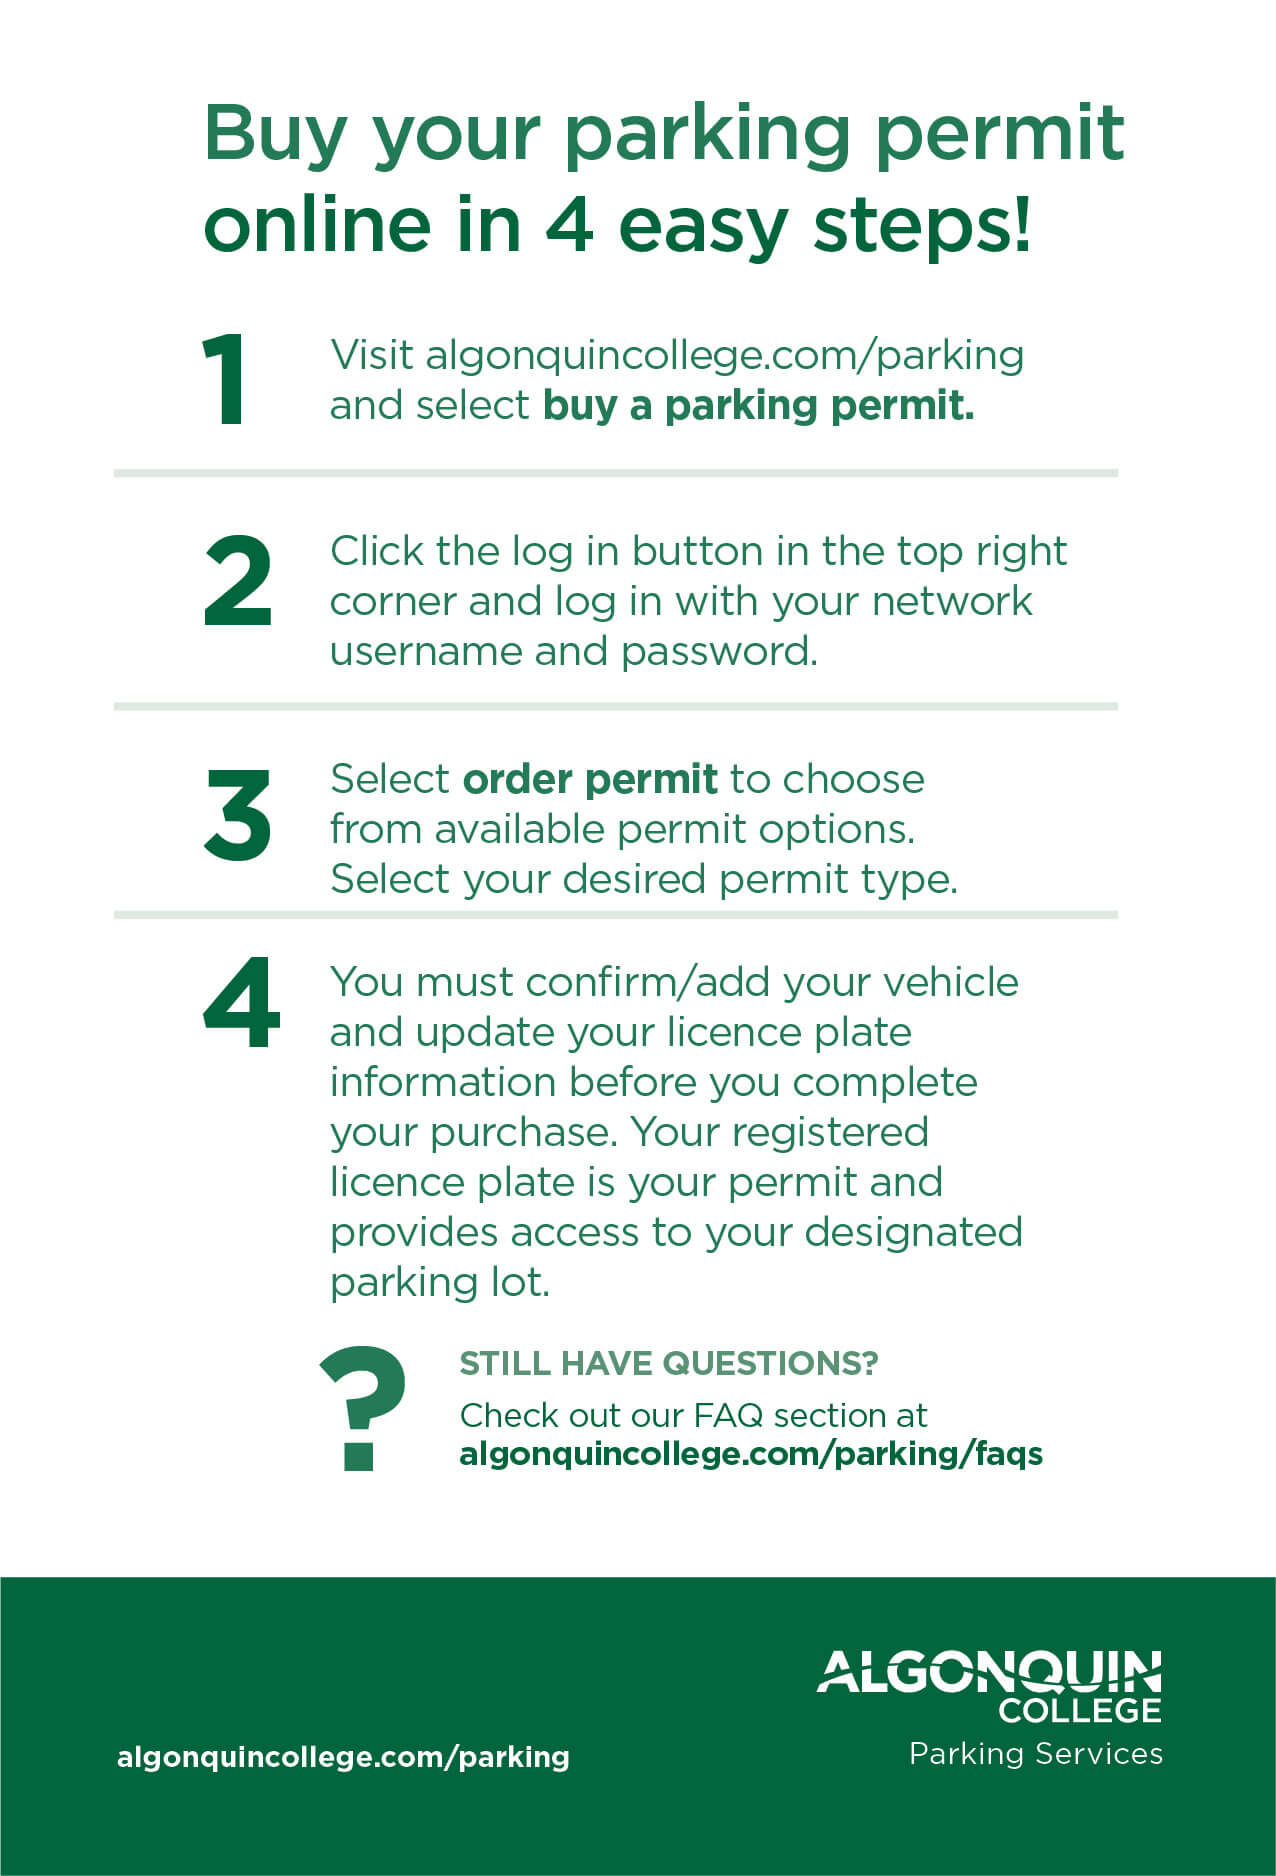 4 steps to purchase parking